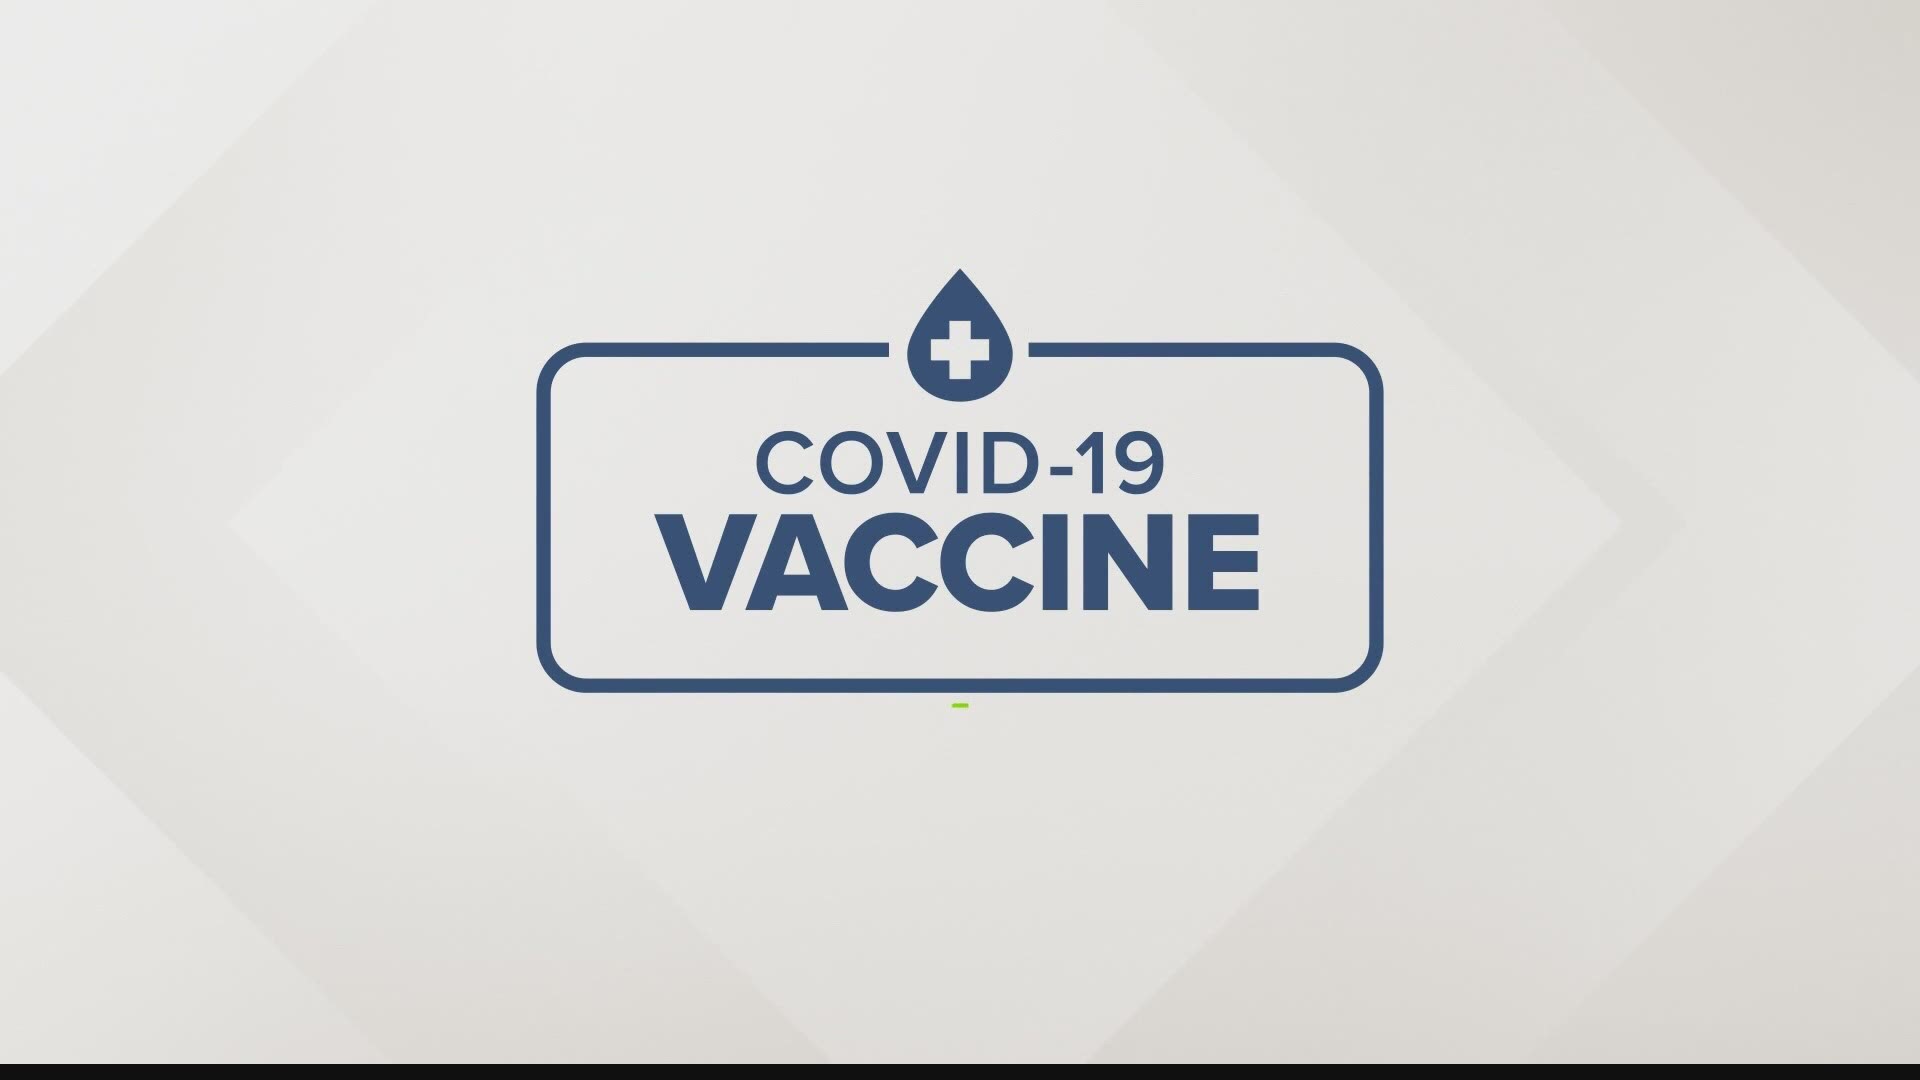 The program will monitor vaccine effectiveness and side effects